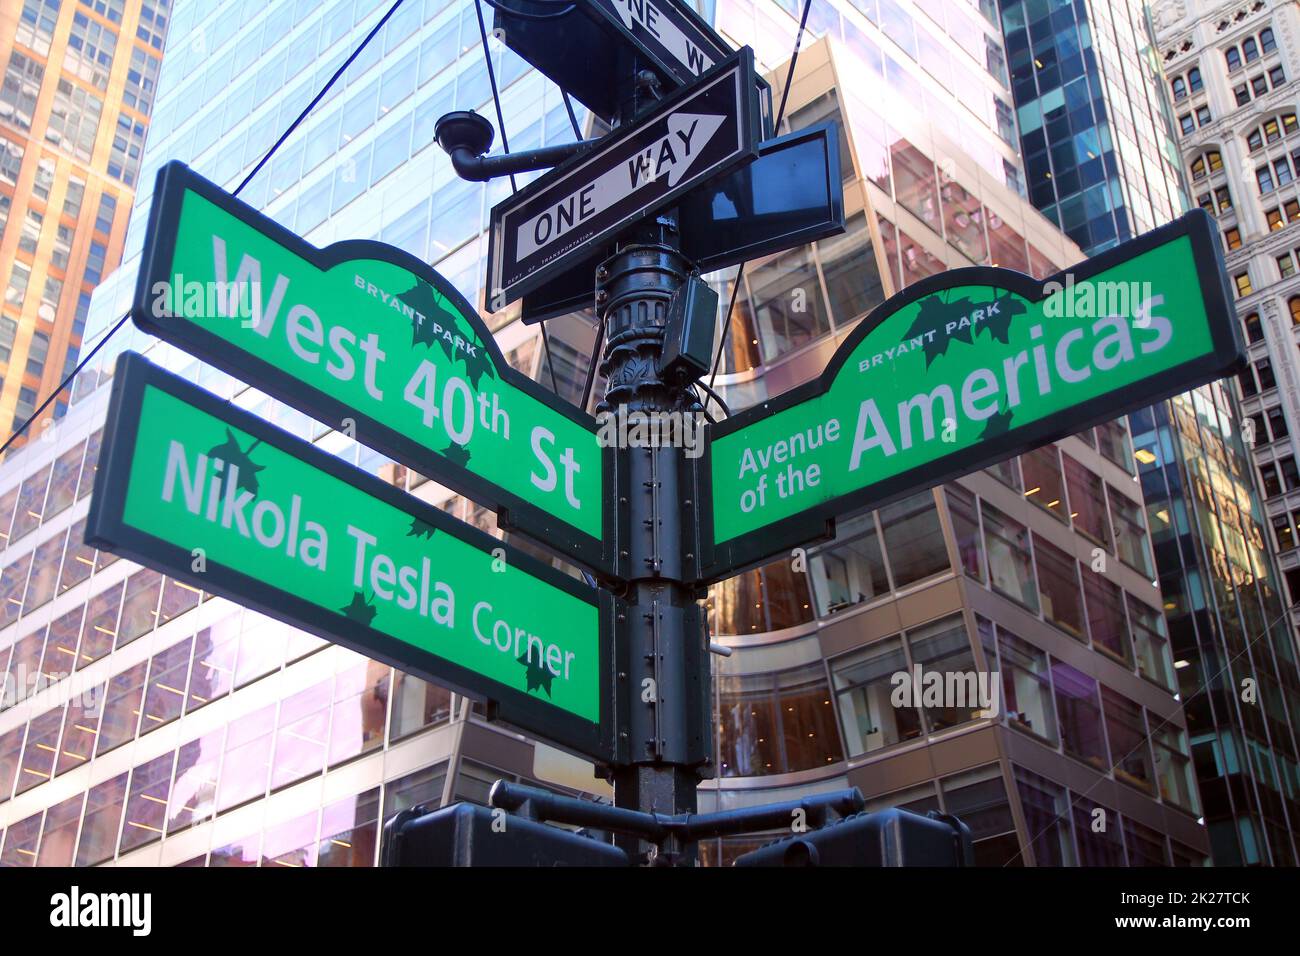 Green West 40th Street and Avenue of the Americas 6th ( Nikola Tesla corner ) Bryant Park traditional sign in Midtown Manhattan in New York City Stock Photo